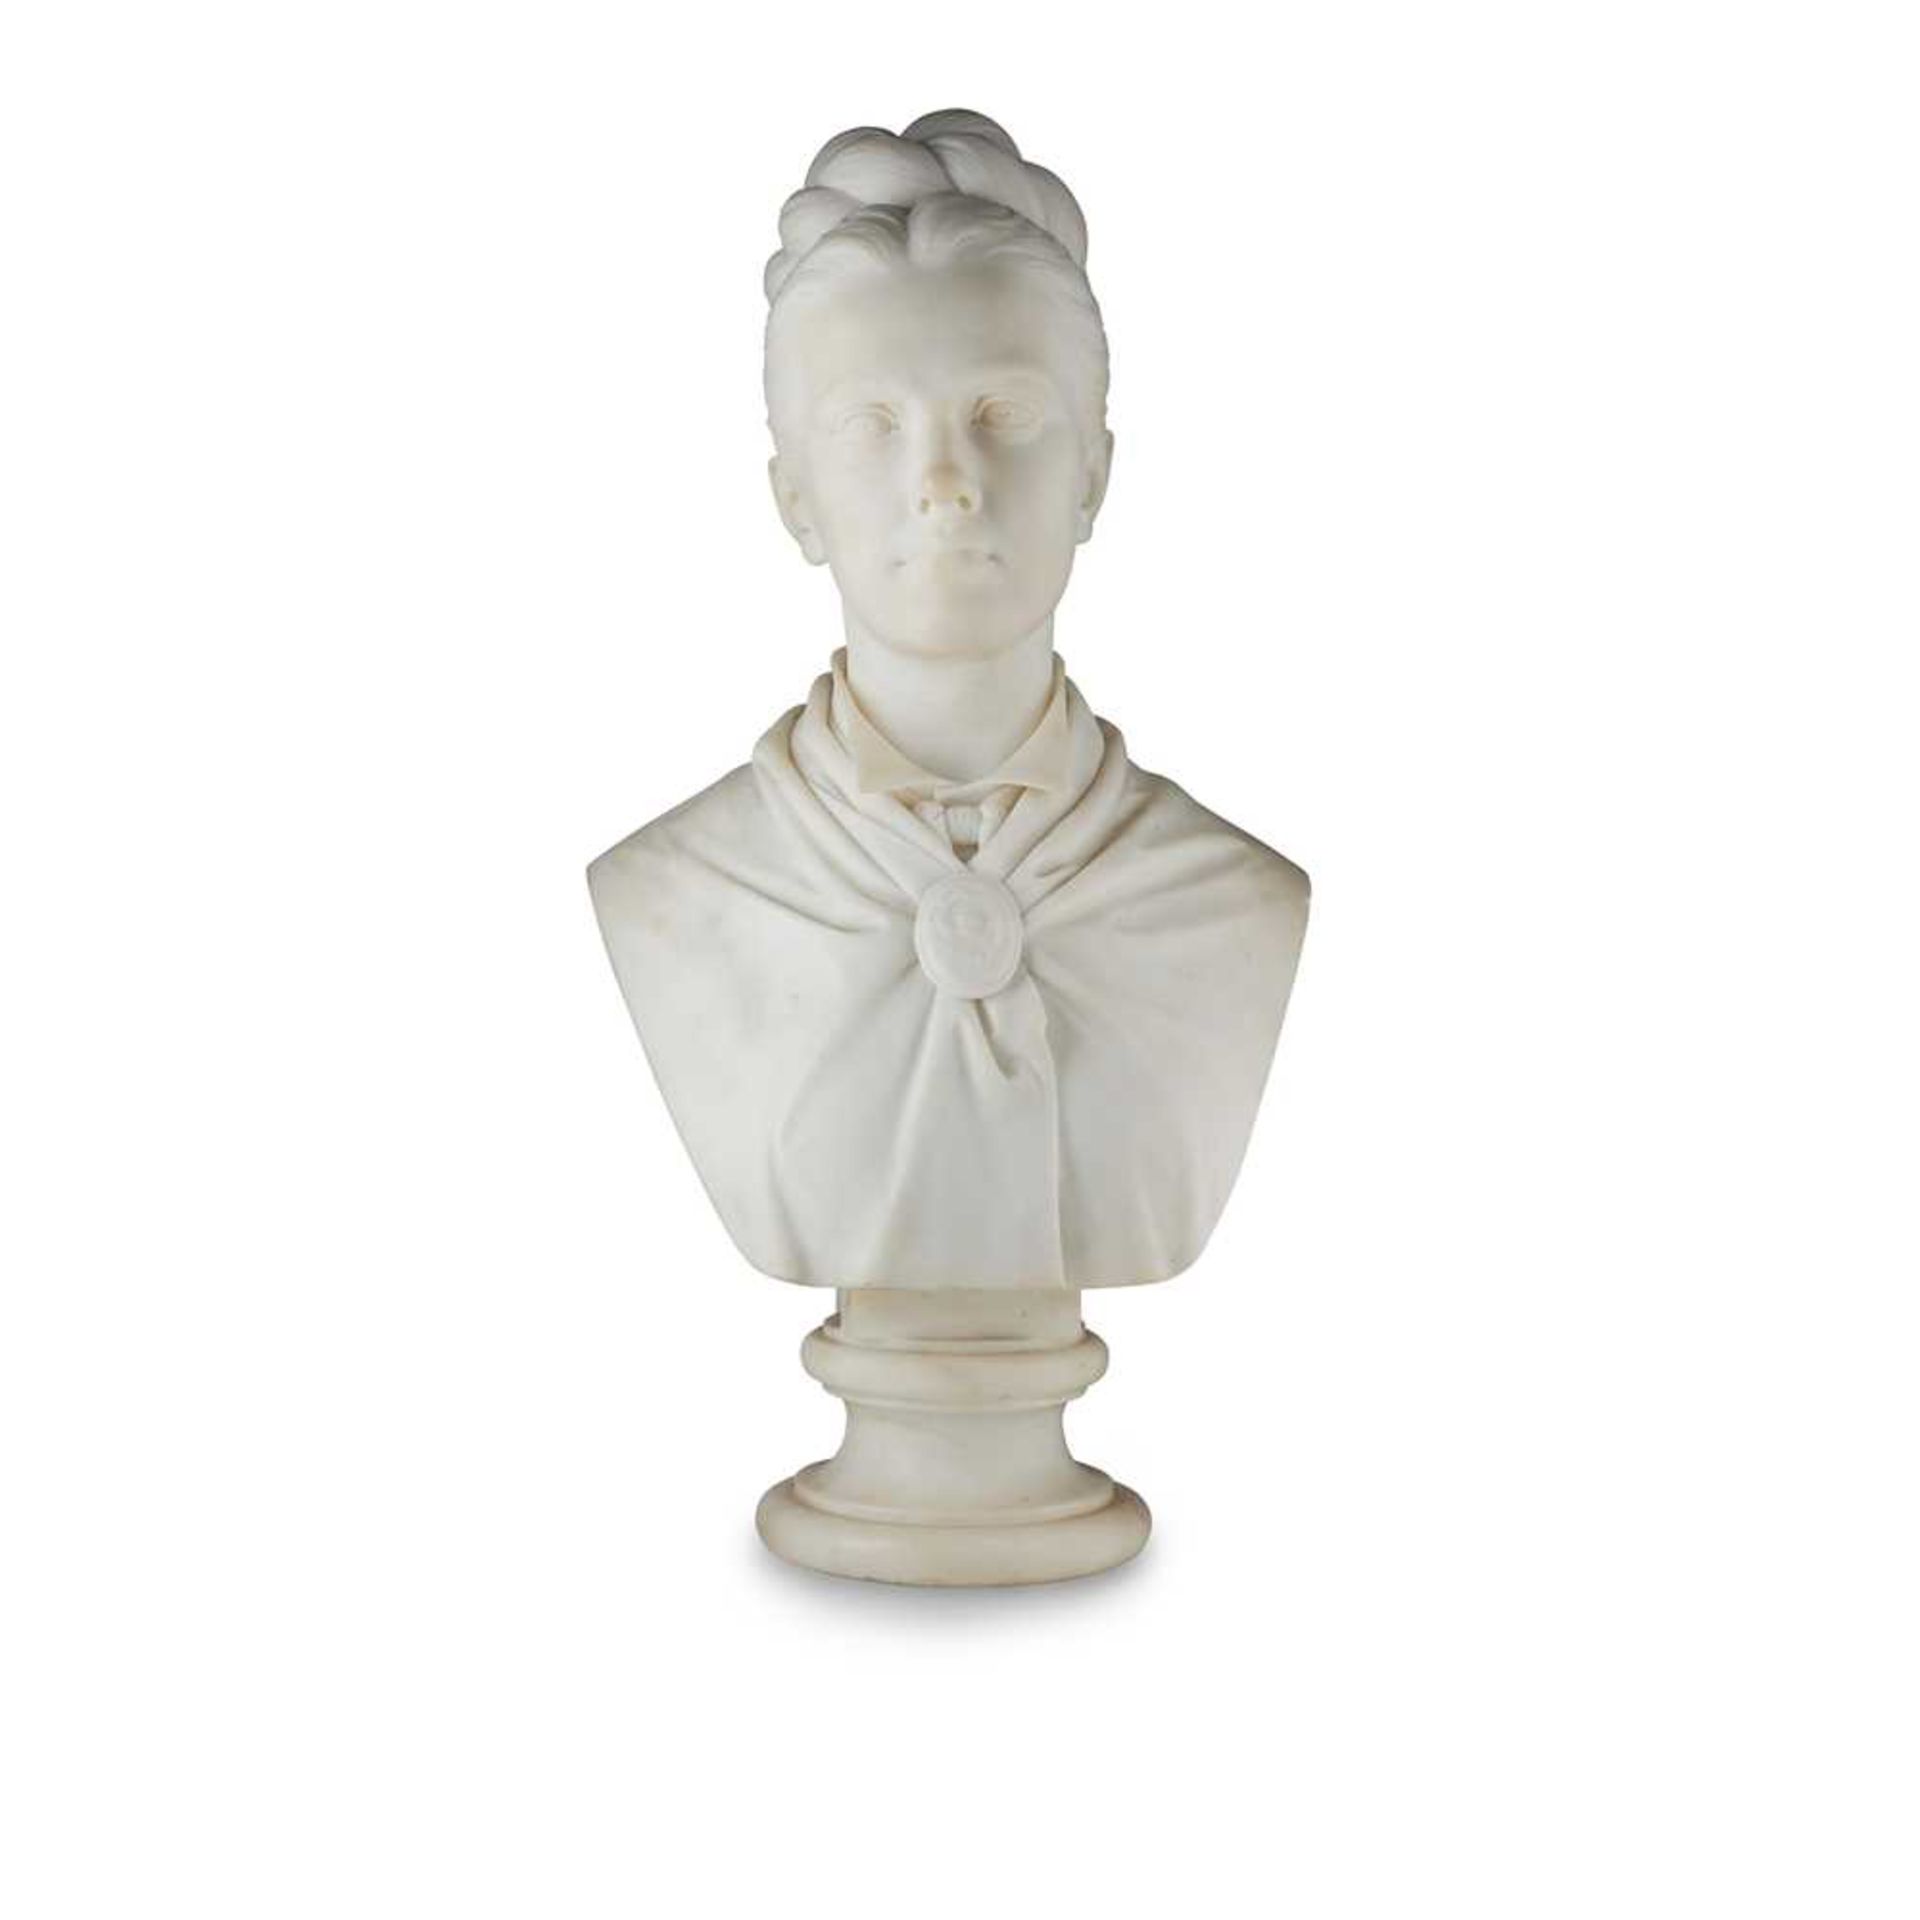 GIOSUÈ ARGENTI (ITALIAN, 1819-1901) MARBLE BUST OF A YOUNG WOMAN, DATED 1875 - Image 2 of 5